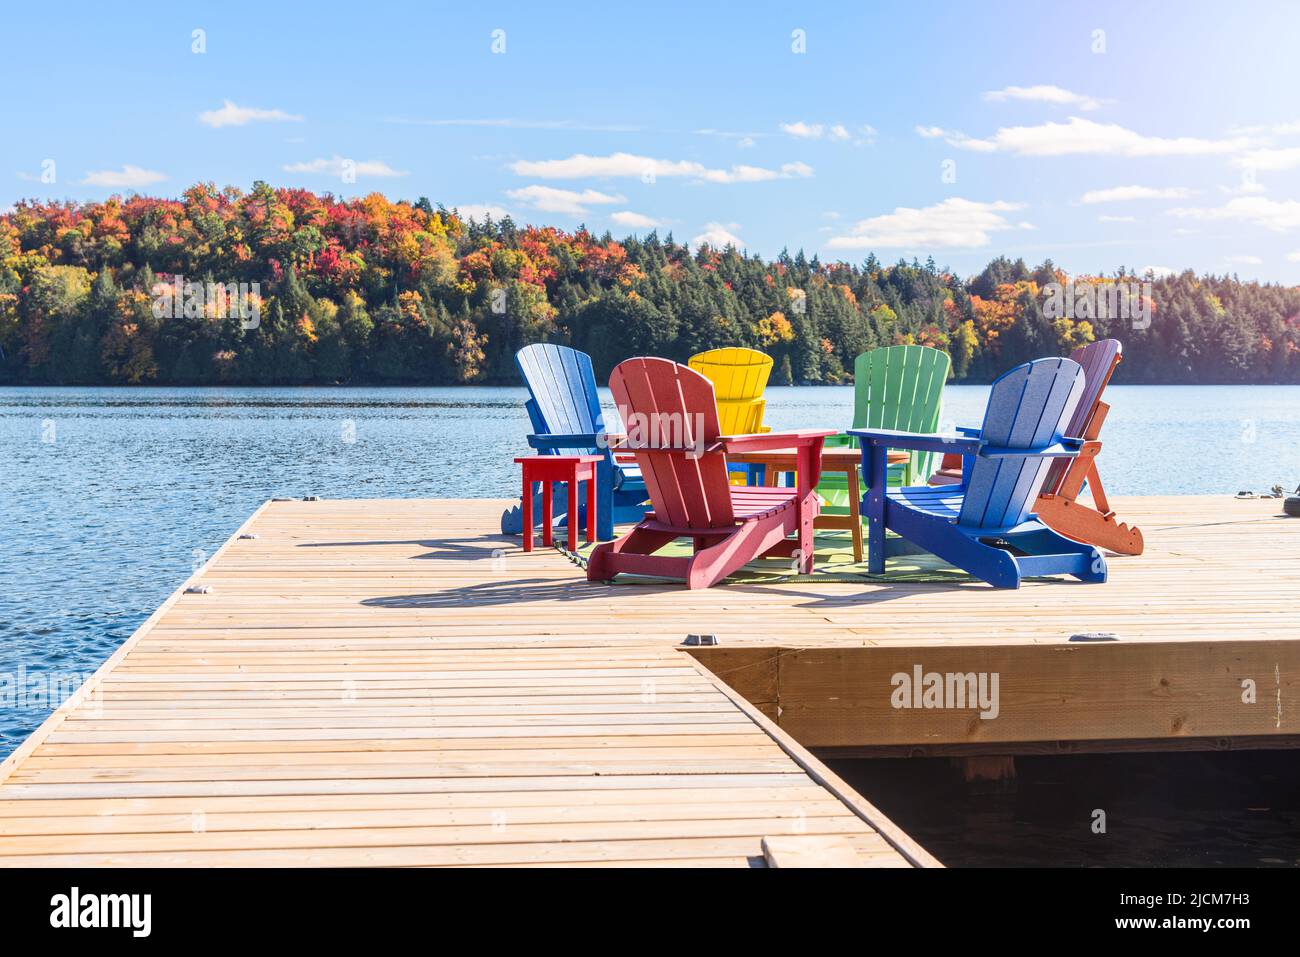 Colourful adirondack chairs around atable on a wooden jetty on a lake on a clear autumn day. Stock Photo